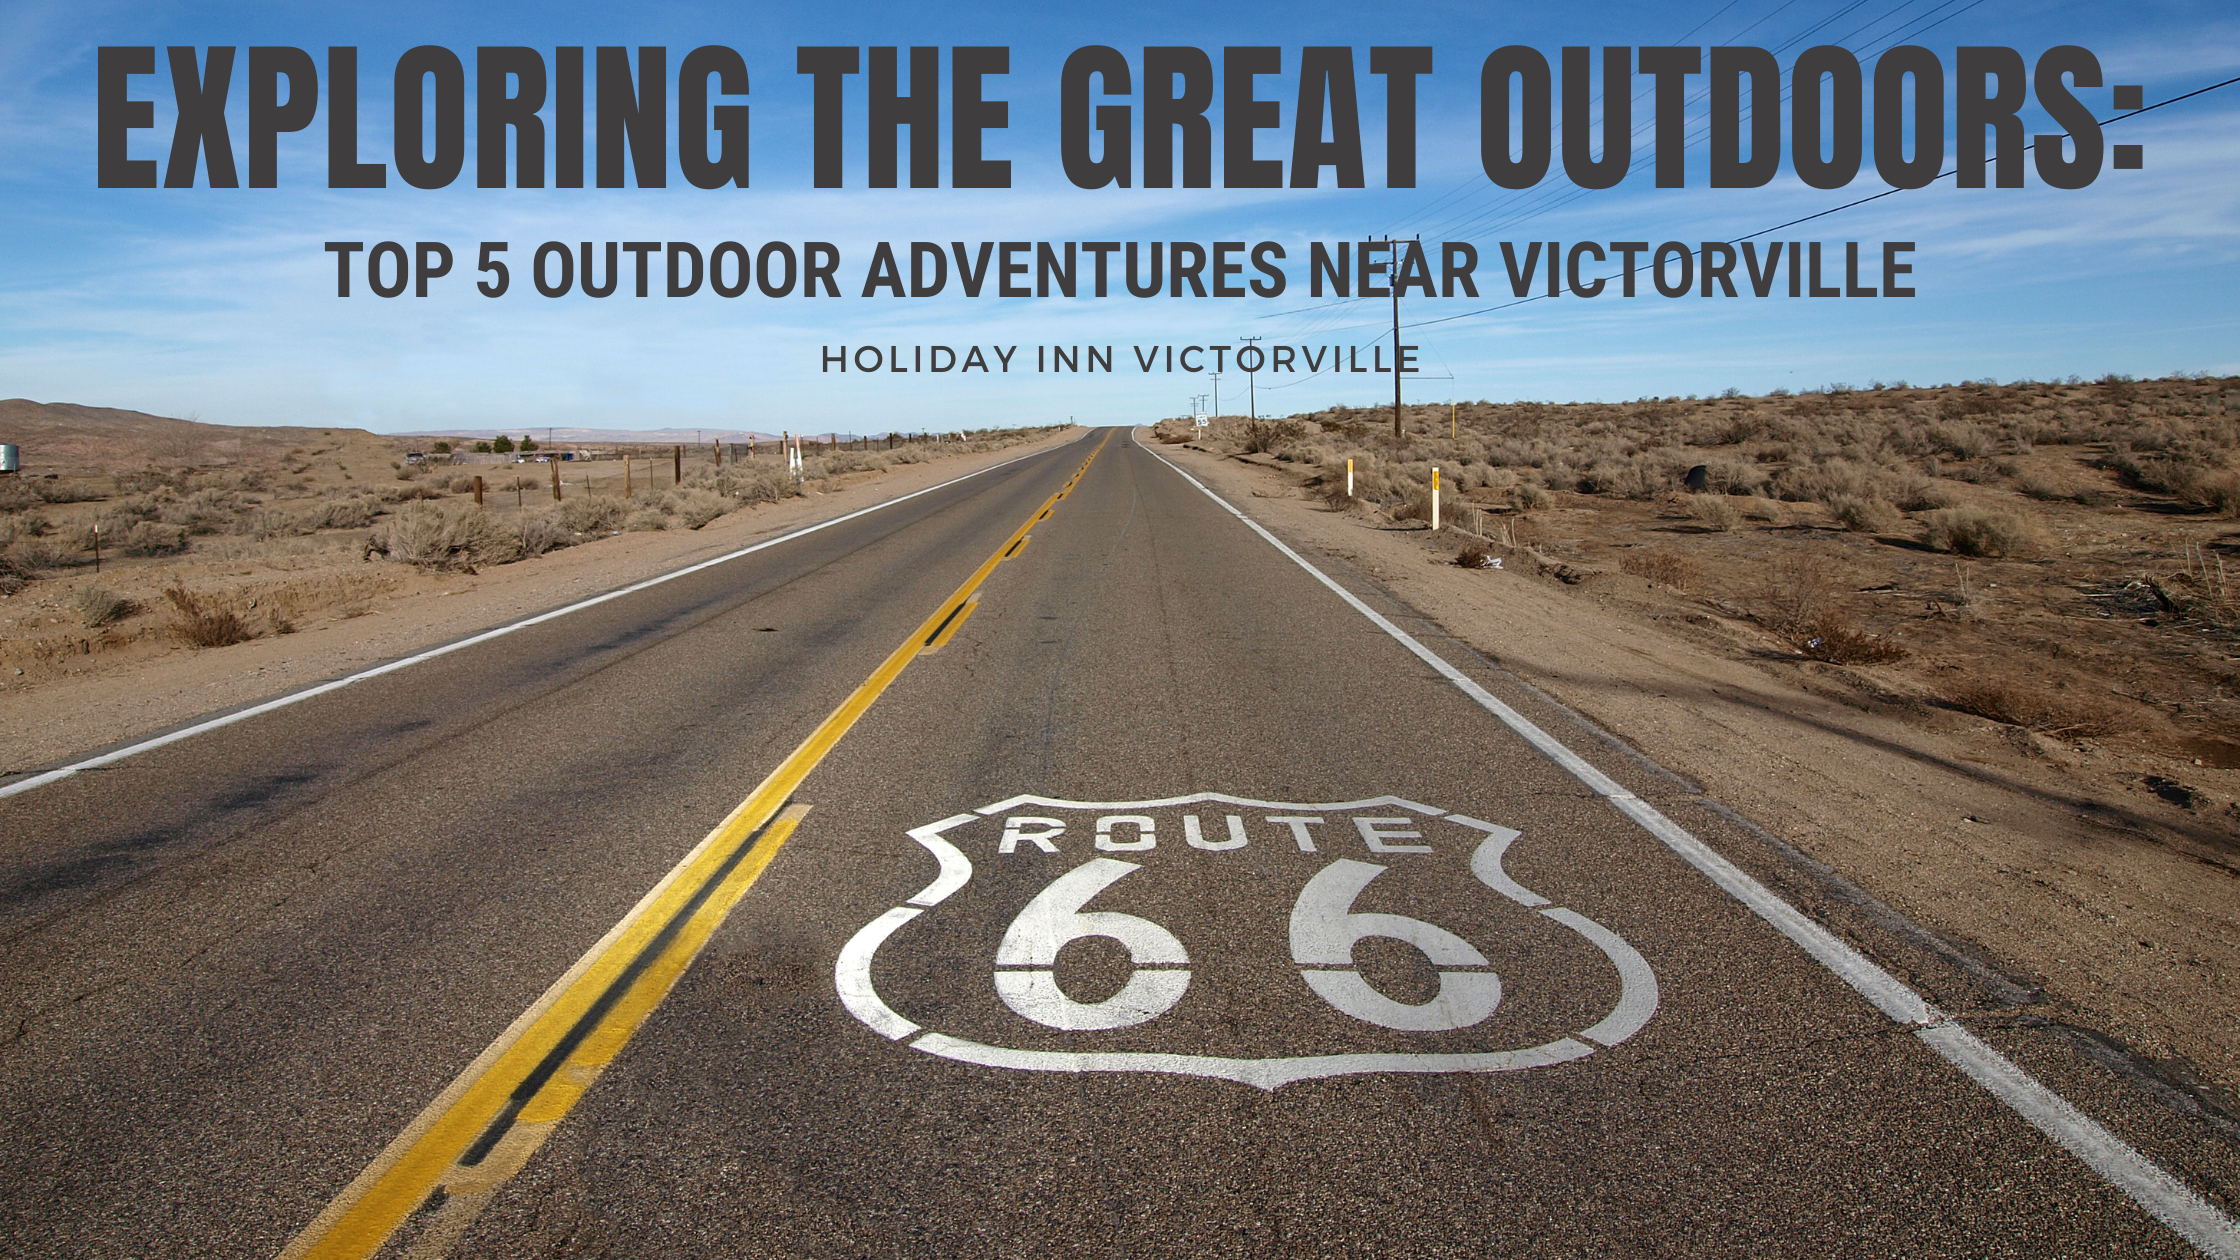 Exploring the Great Outdoors: Top 5 Outdoor Adventures Near Victorville